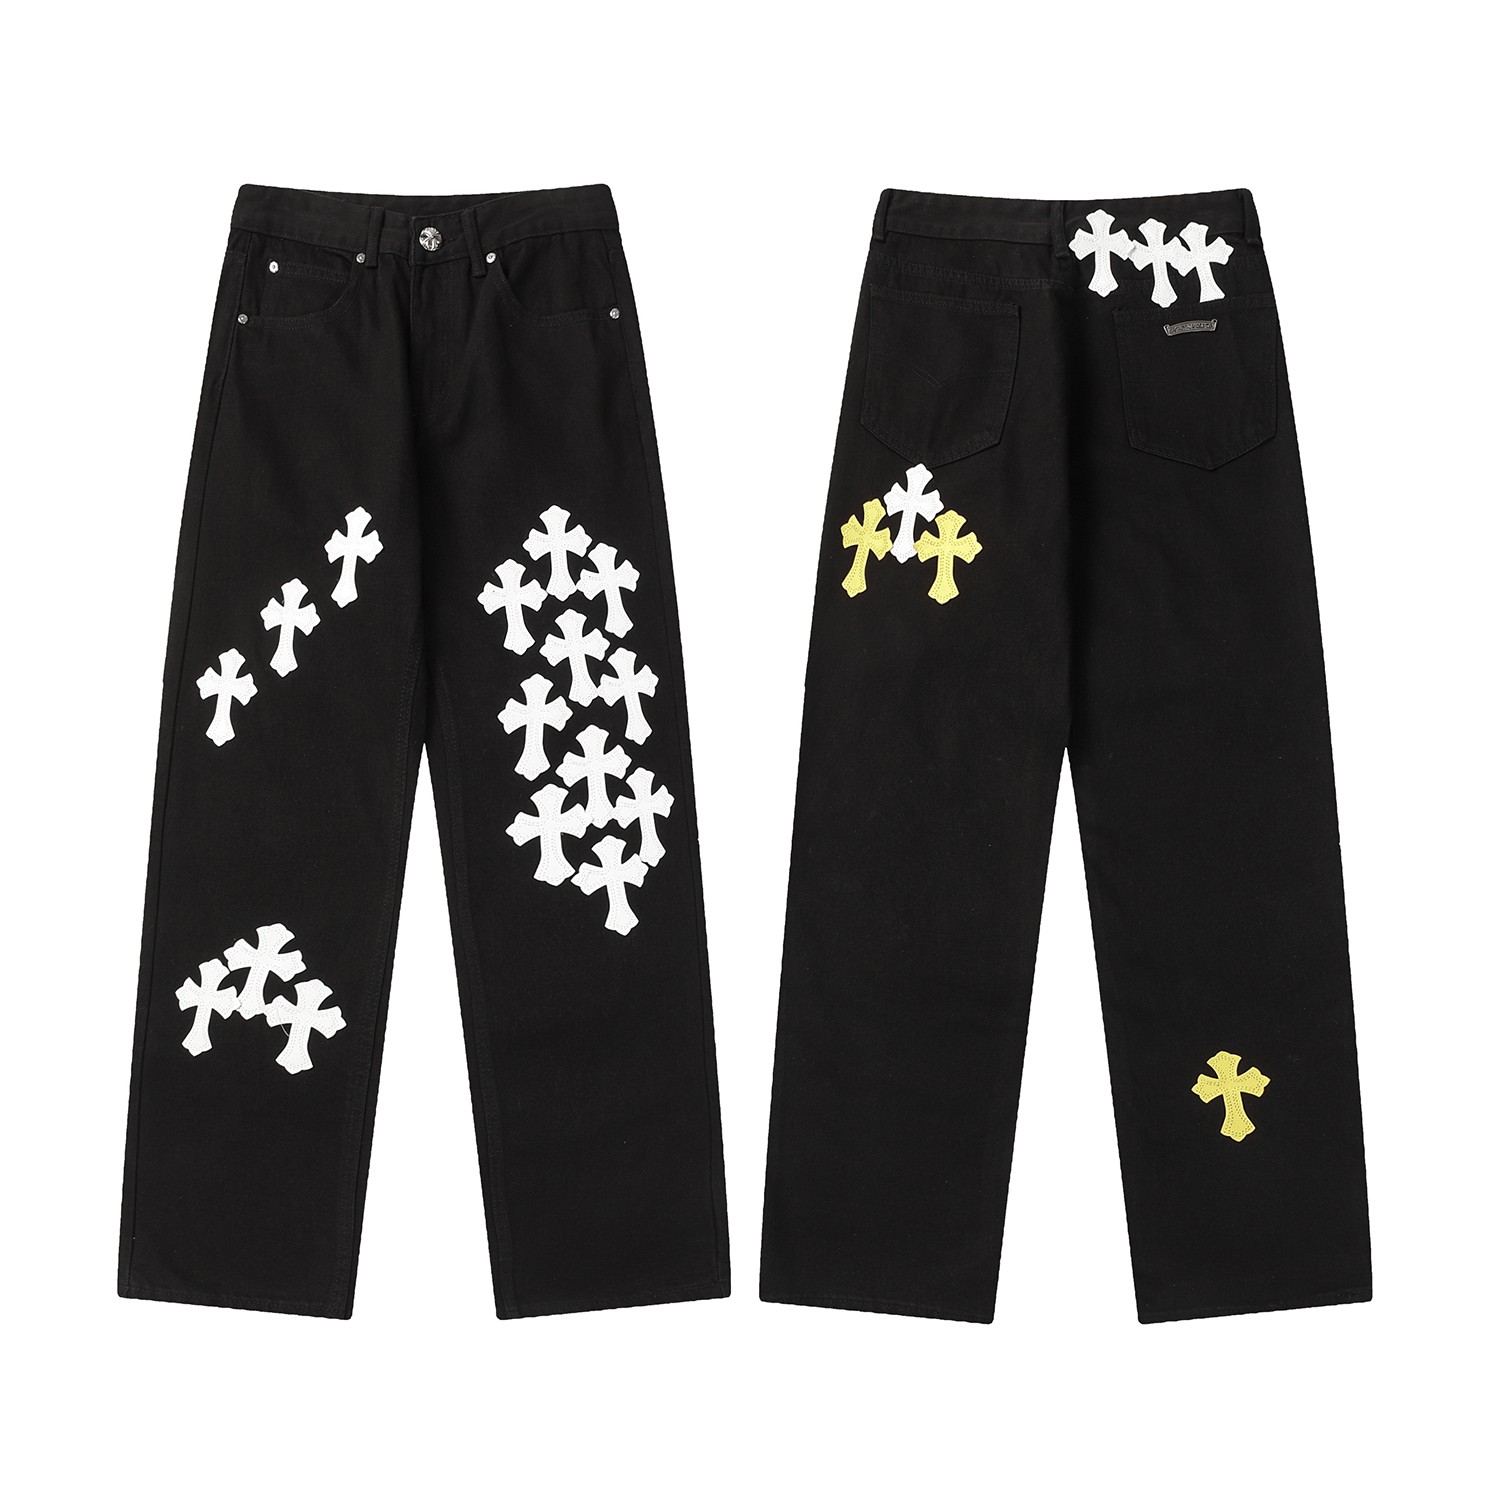 Chrome Hearts Clothing Jeans Best Replica New Style
 Black Unisex